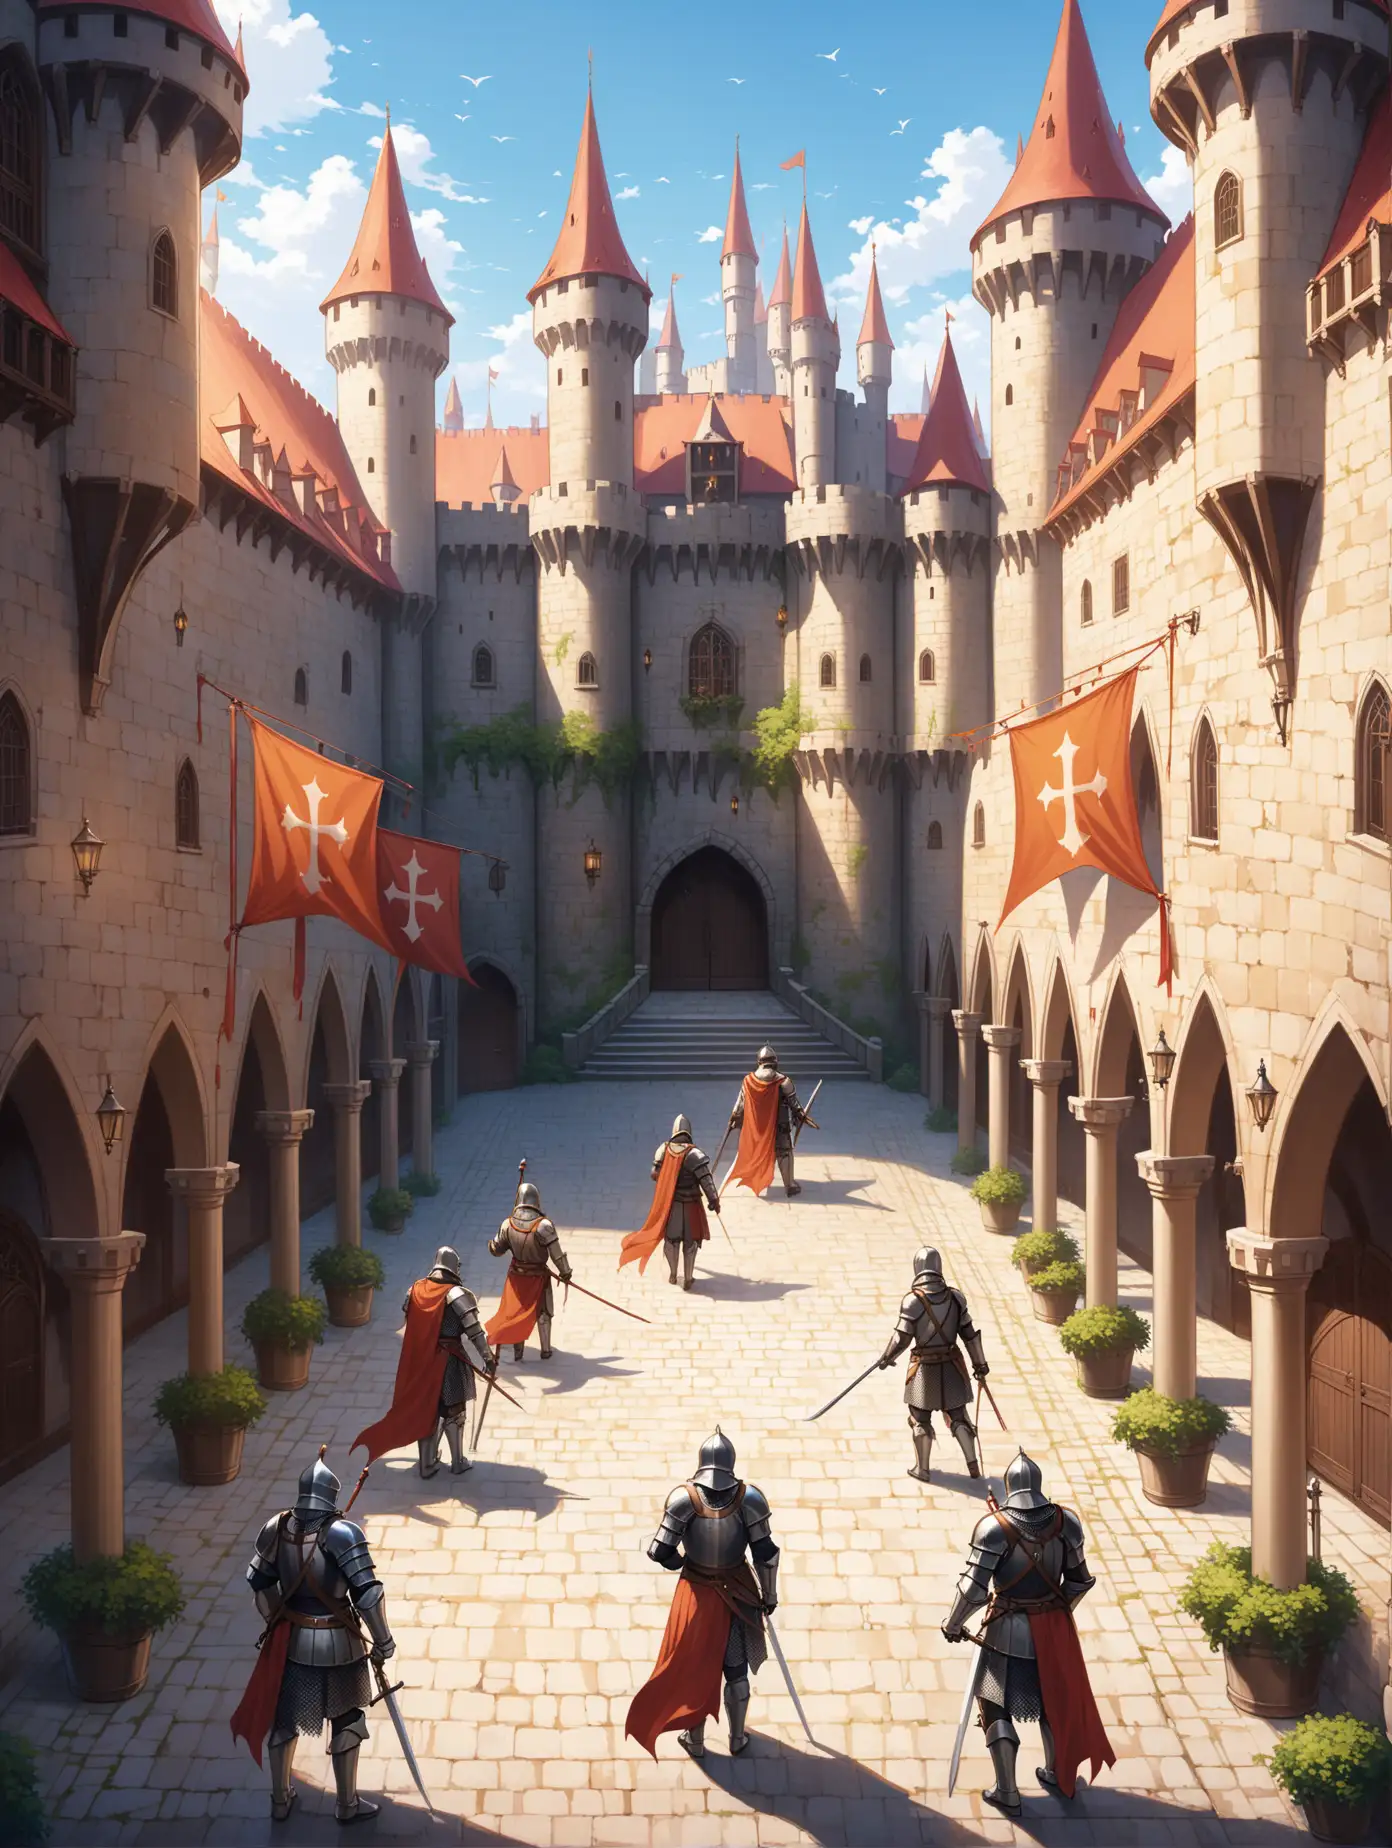 Medieval Castle Courtyard with Knights and Banners